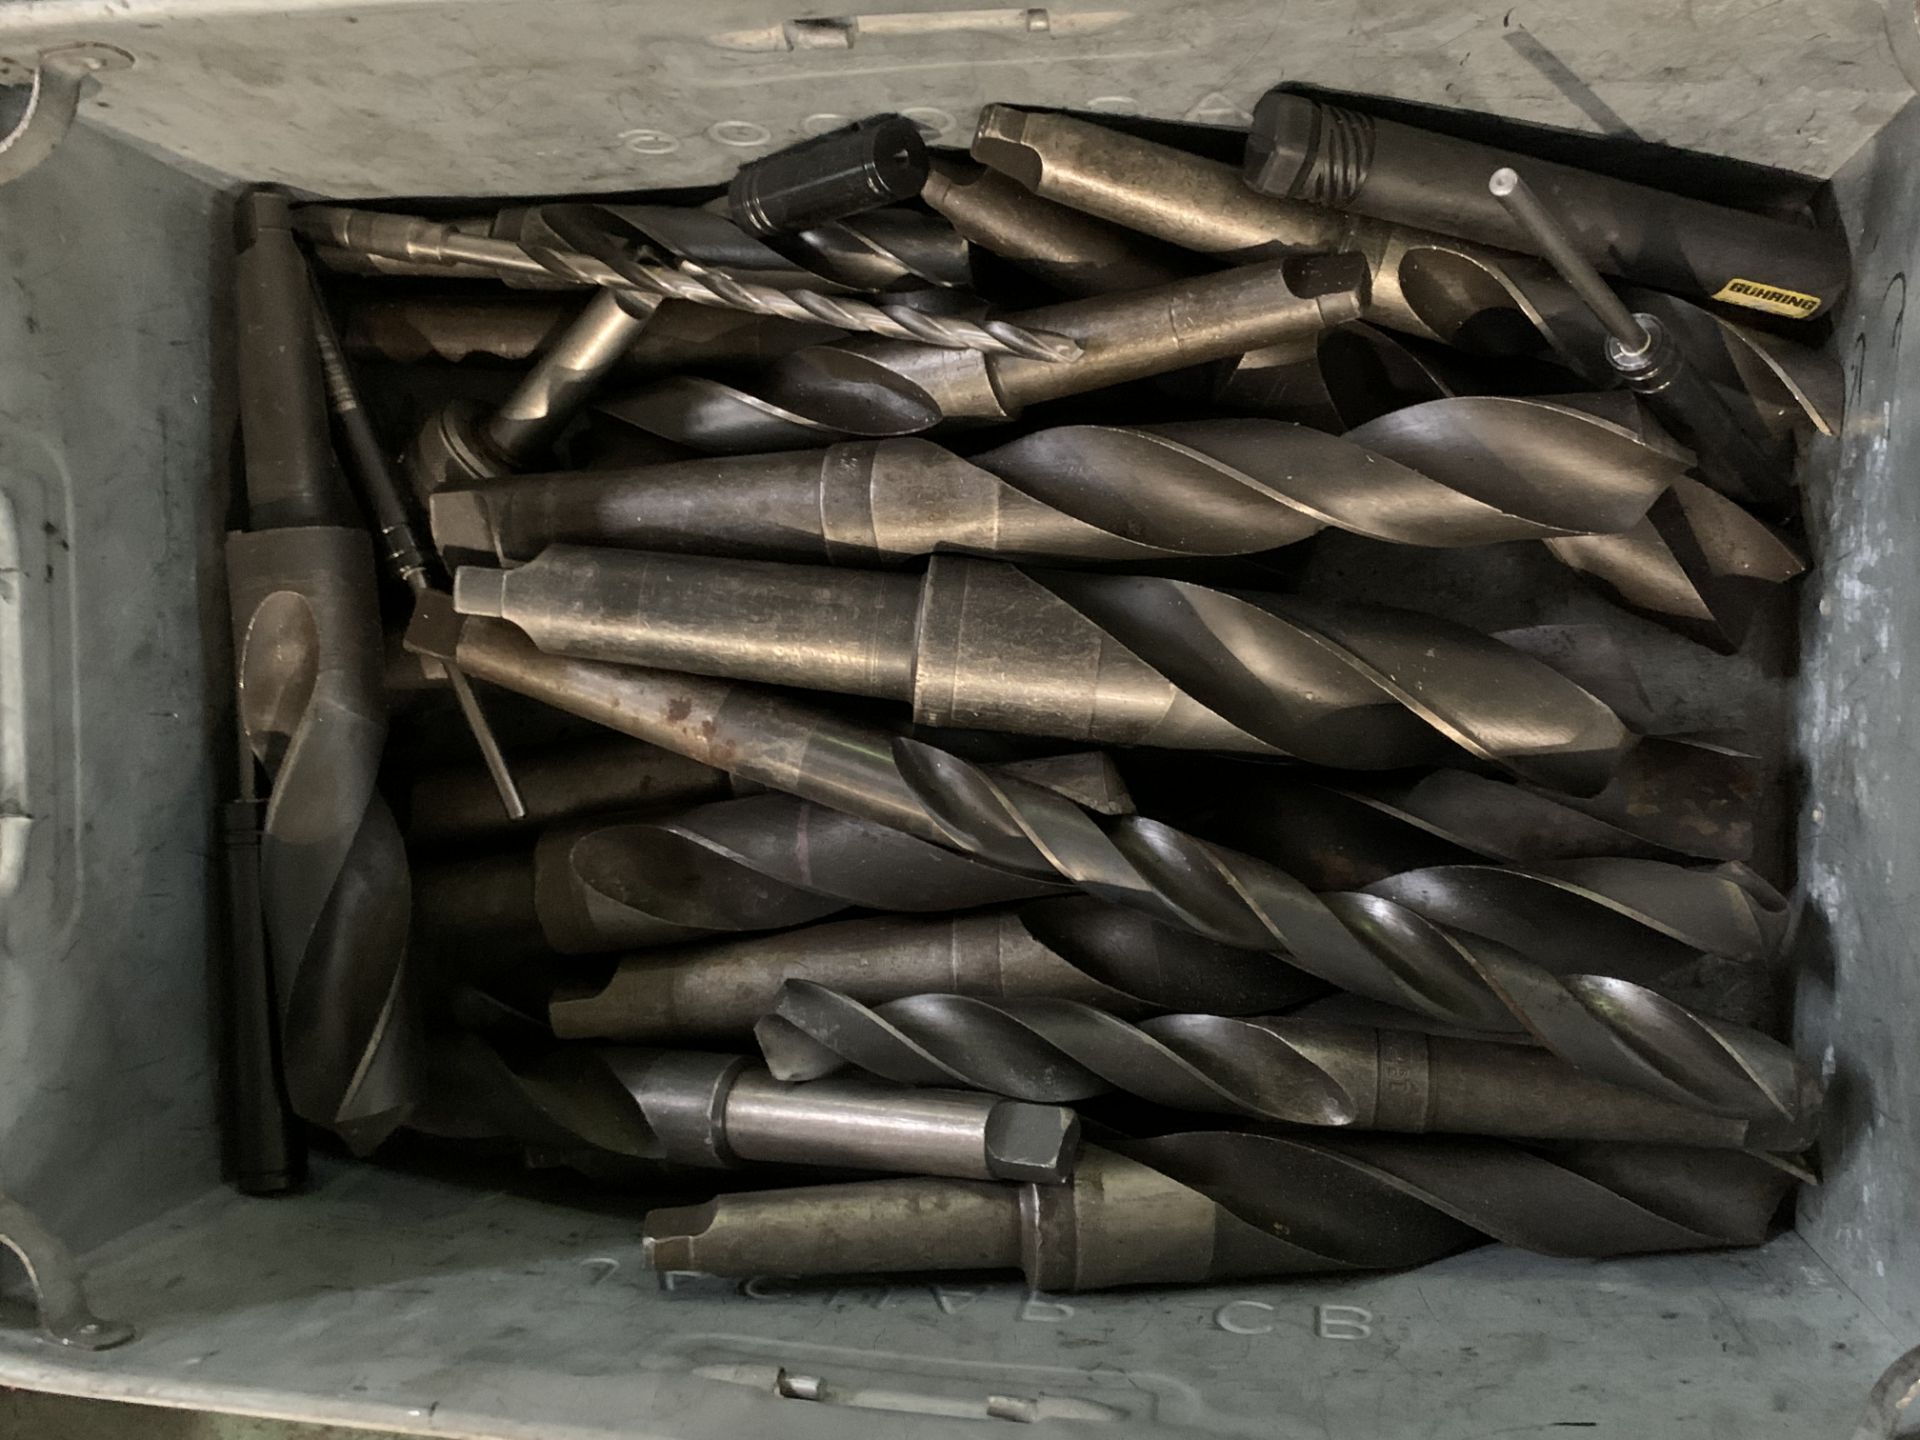 Quantity of Various Sized Drills in 5x Bins. - Image 5 of 6